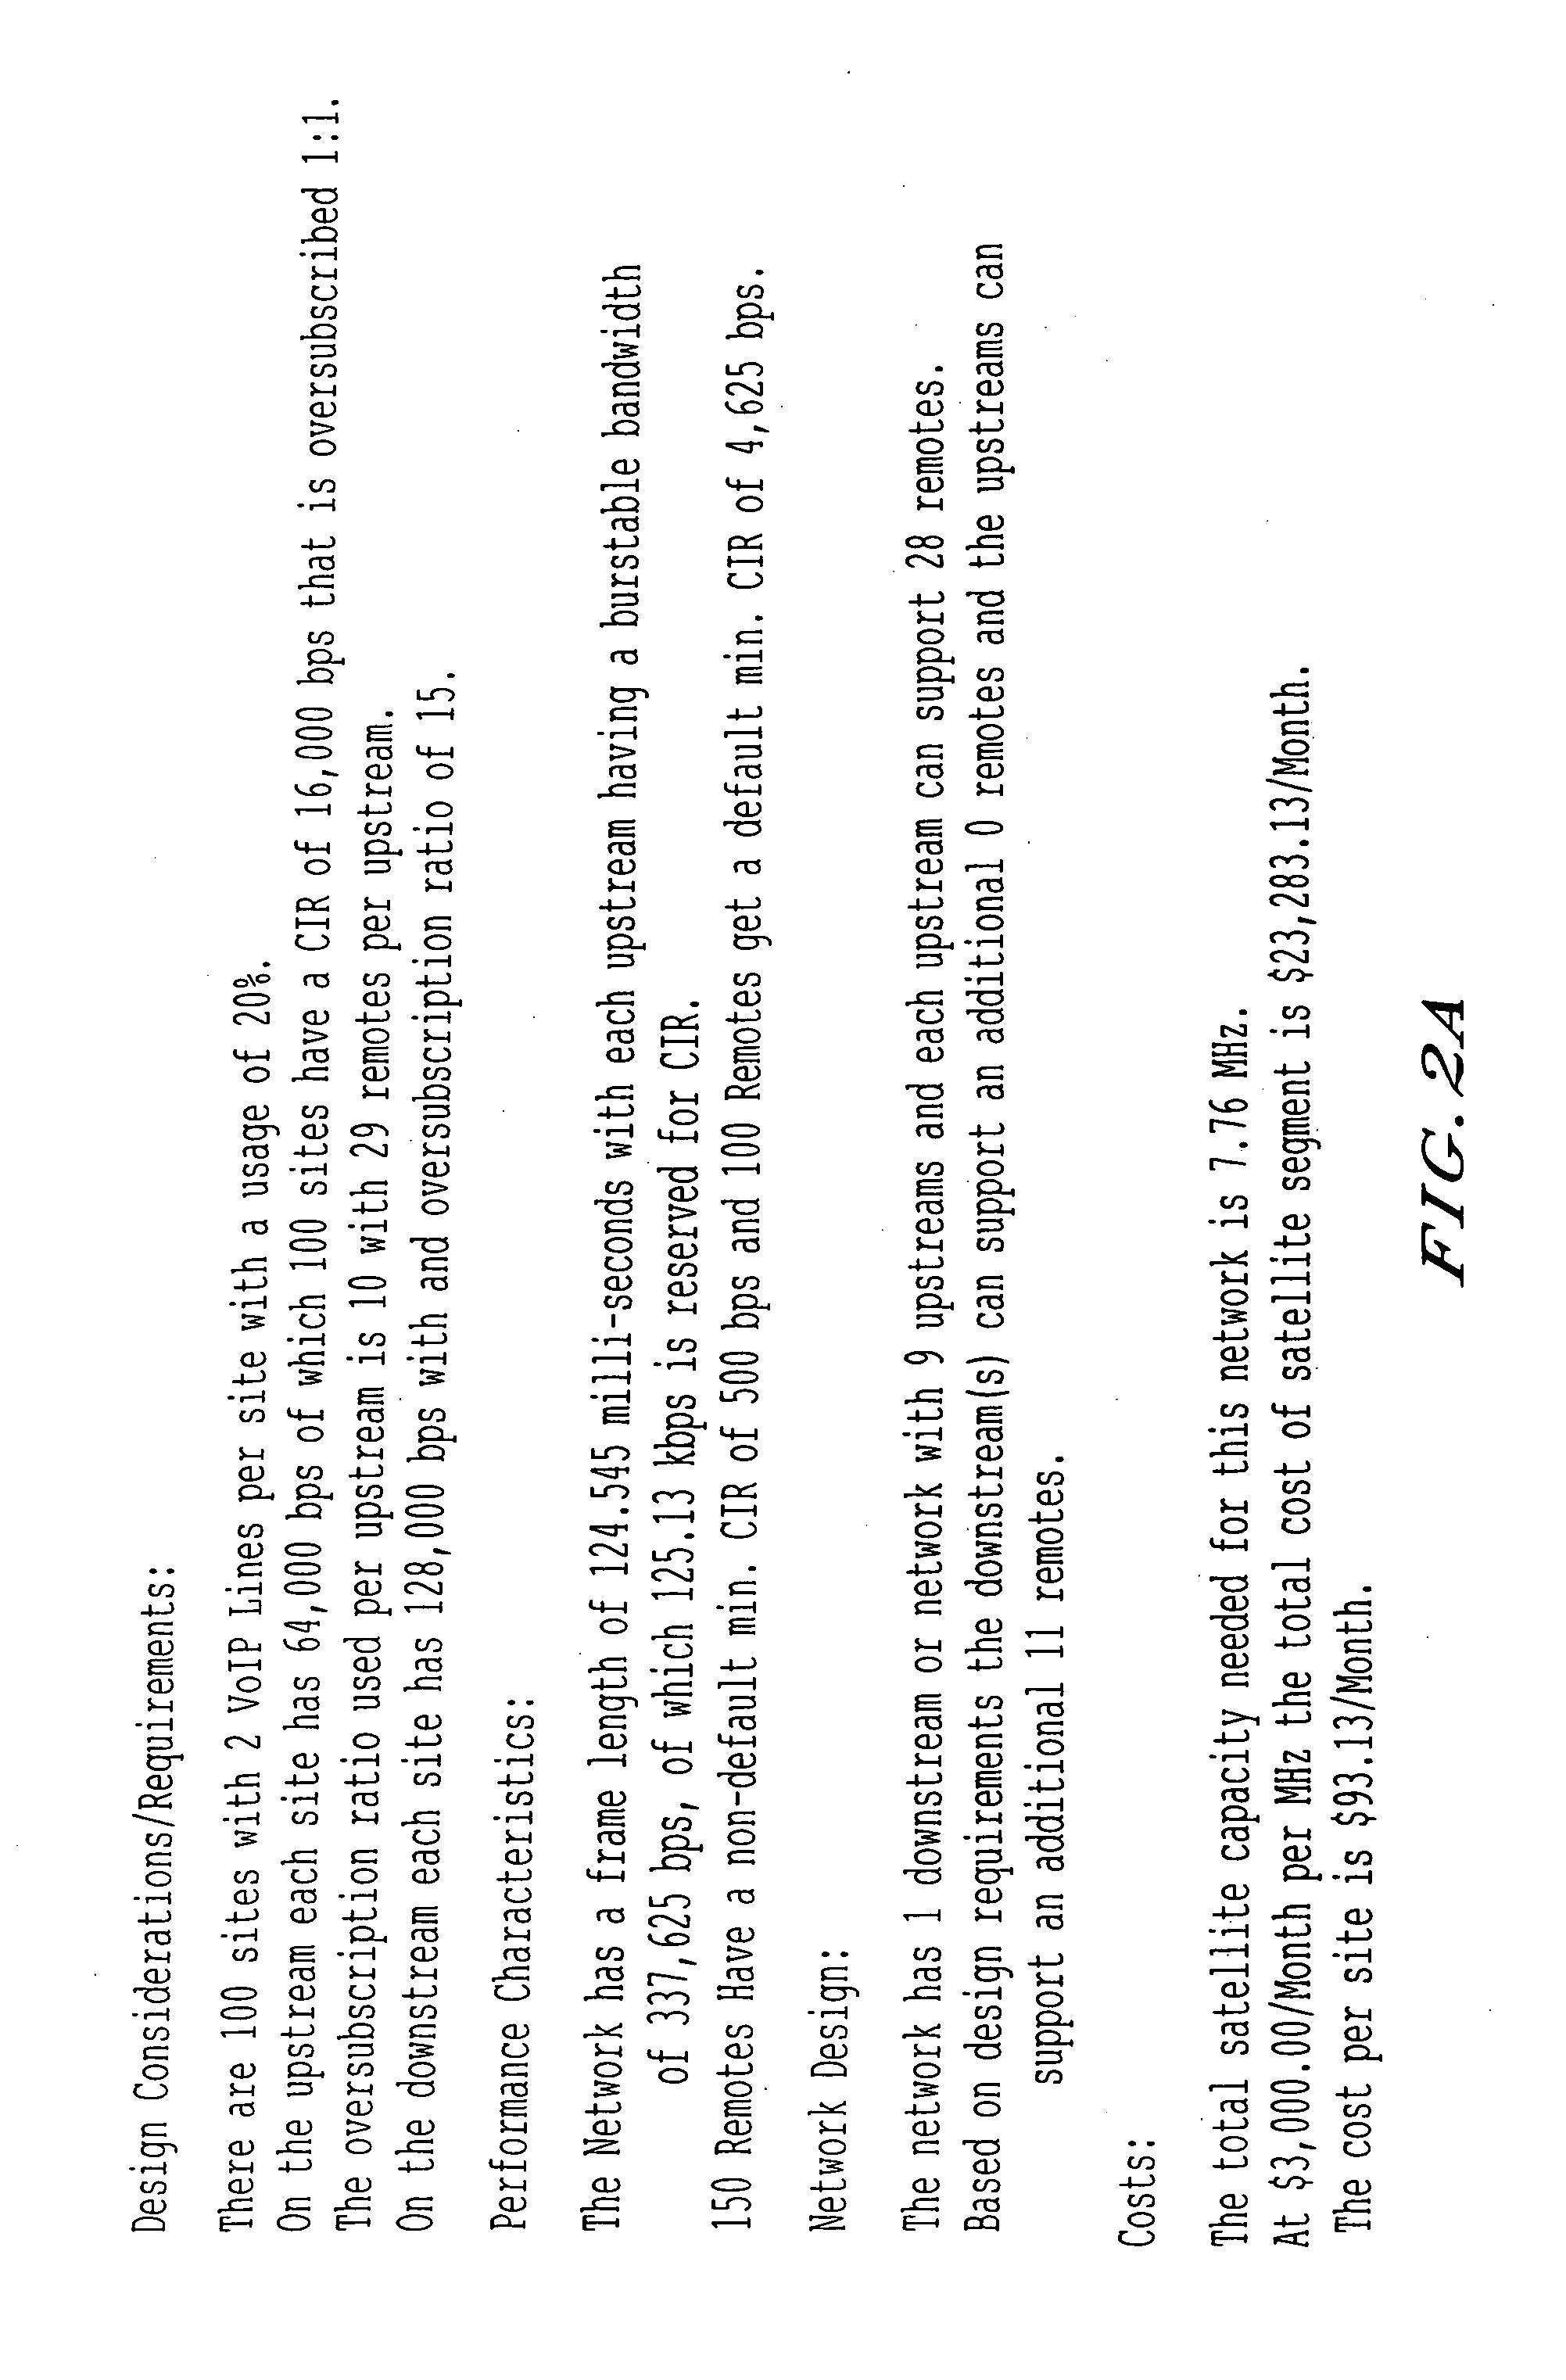 Method, apparatus, and system for designing and planning a shared satellite communications network